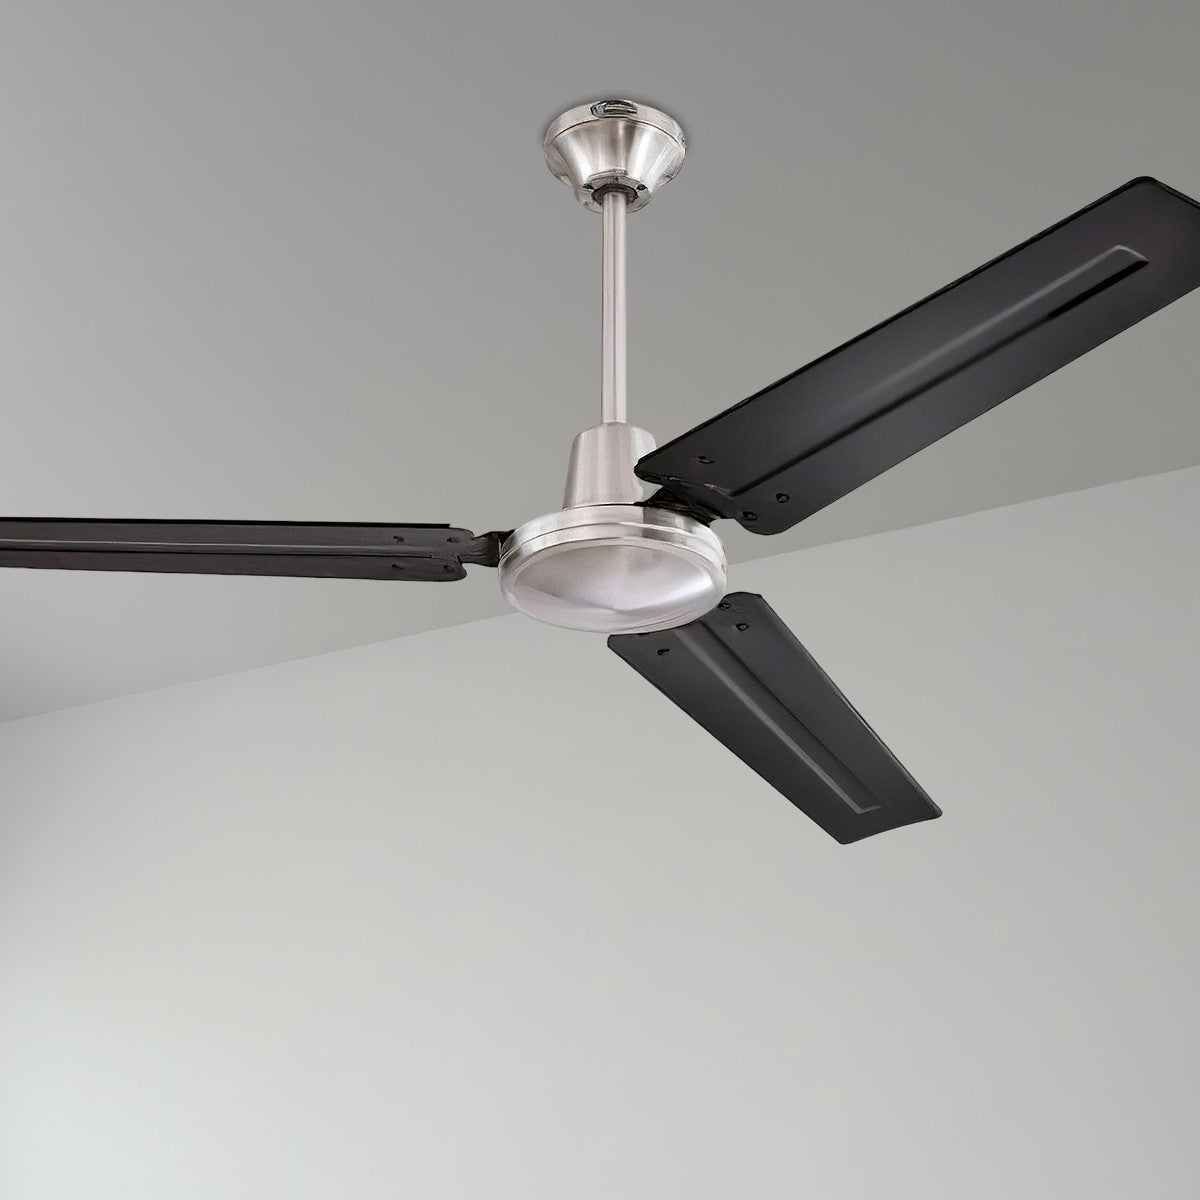 Jax 56 Inch Industrial Ceiling Fan With Wall Control, Brushed Nickel Finish with Black Steel Blades